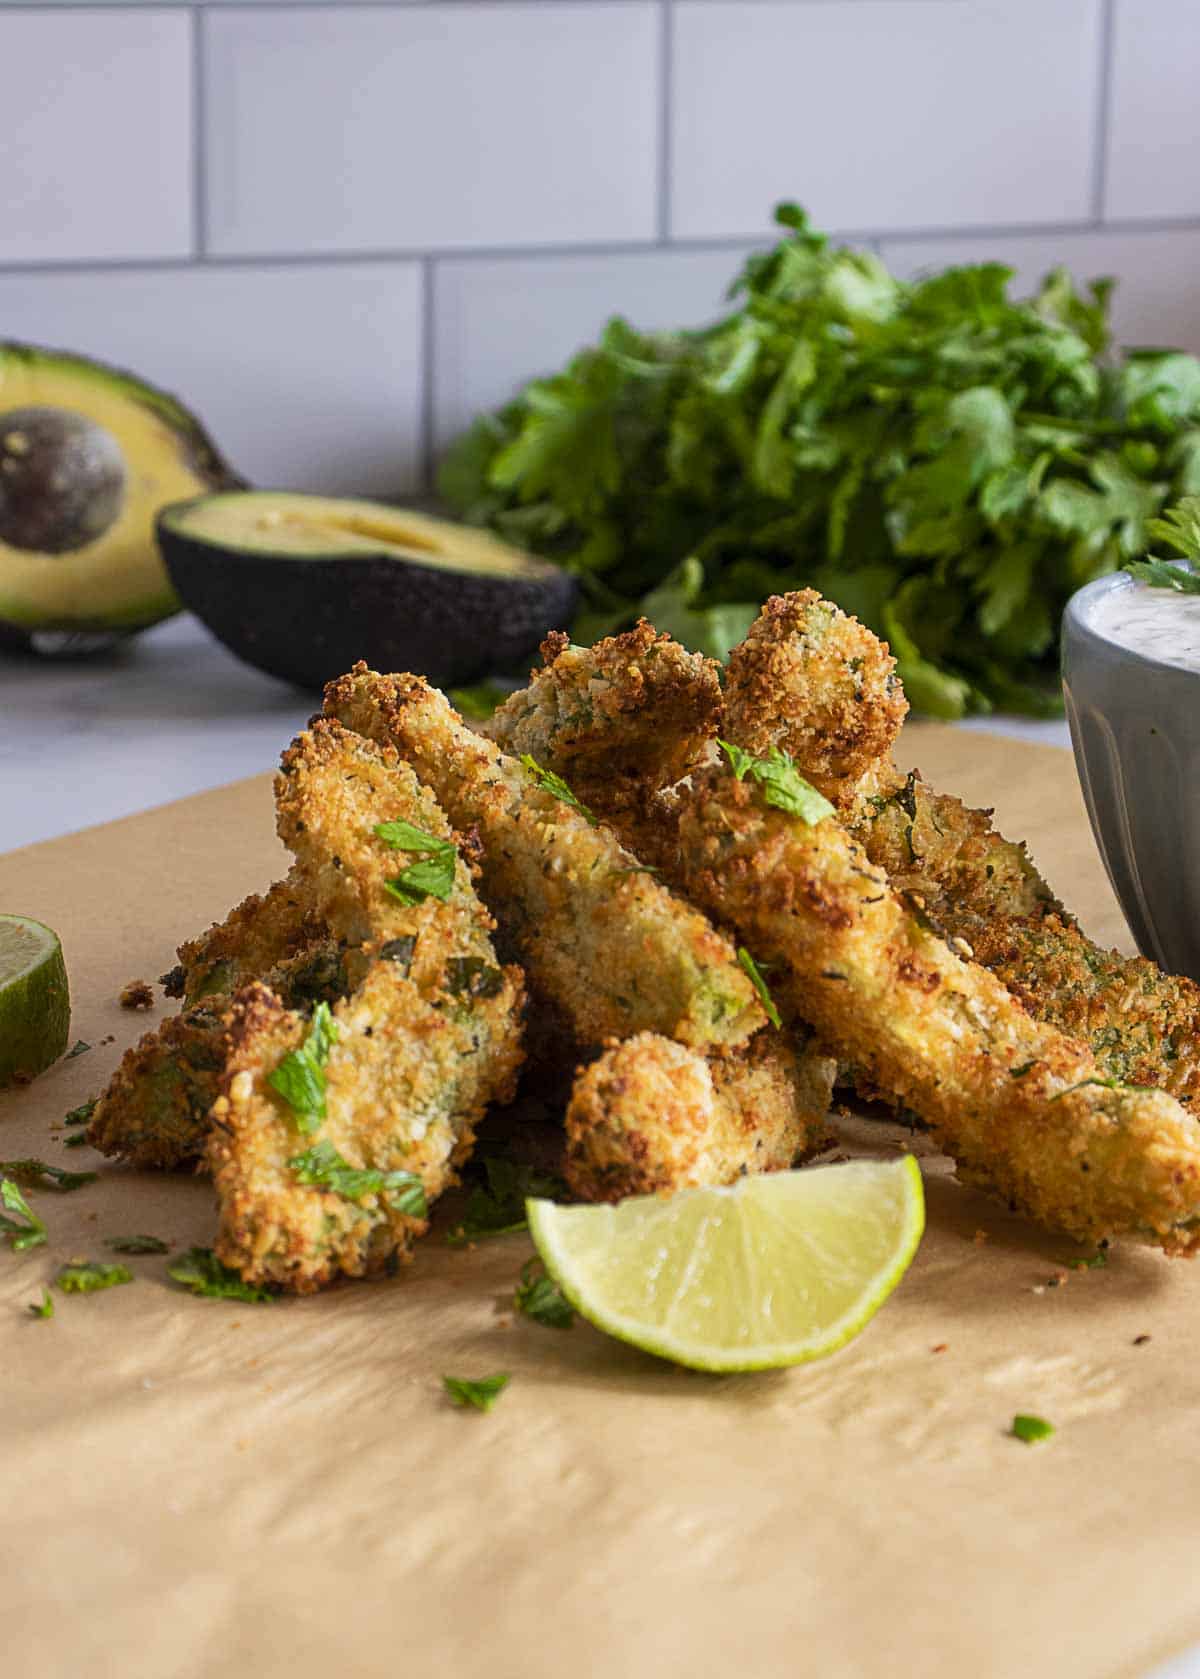 Crispy avocado fries on the table with dipping sauce on the side.